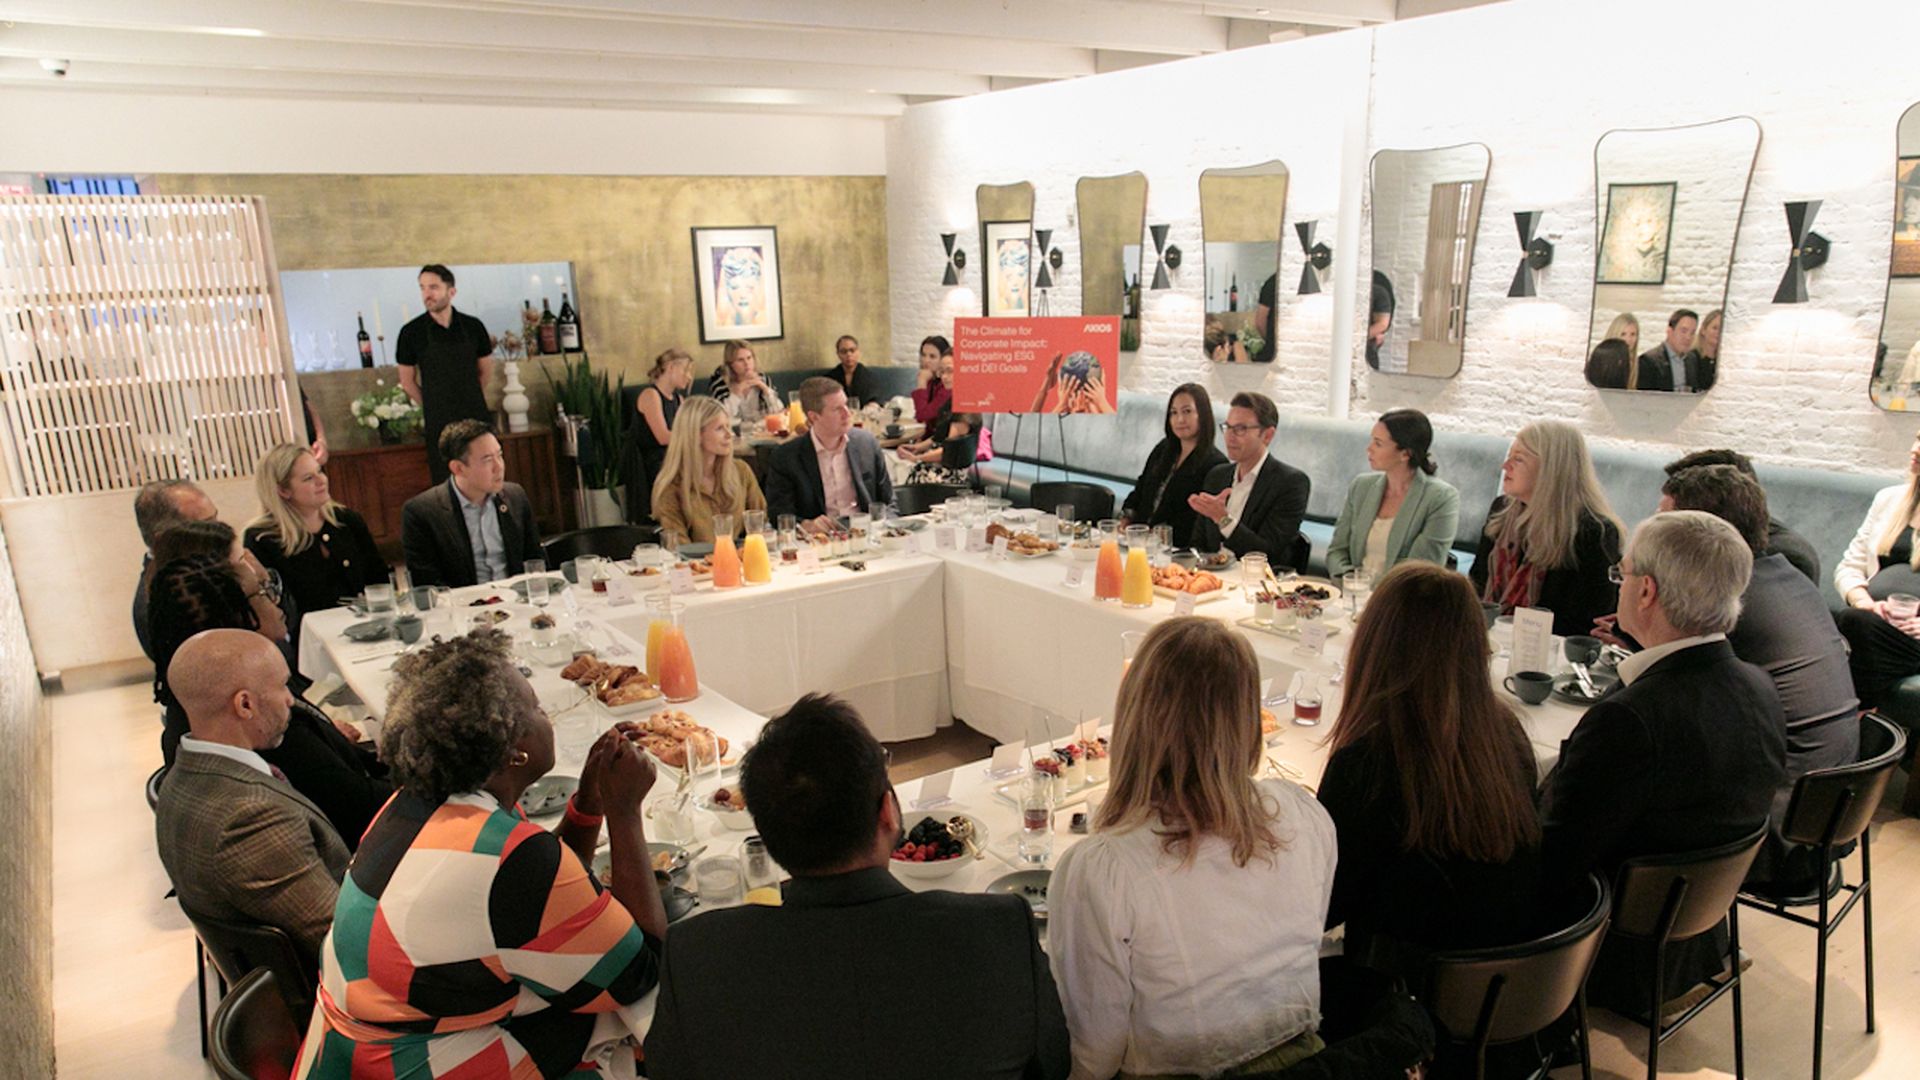 Roundtable discussion on corporate impact at this morning's Axios event sponsored by PwC. Photo: Steven Duarte